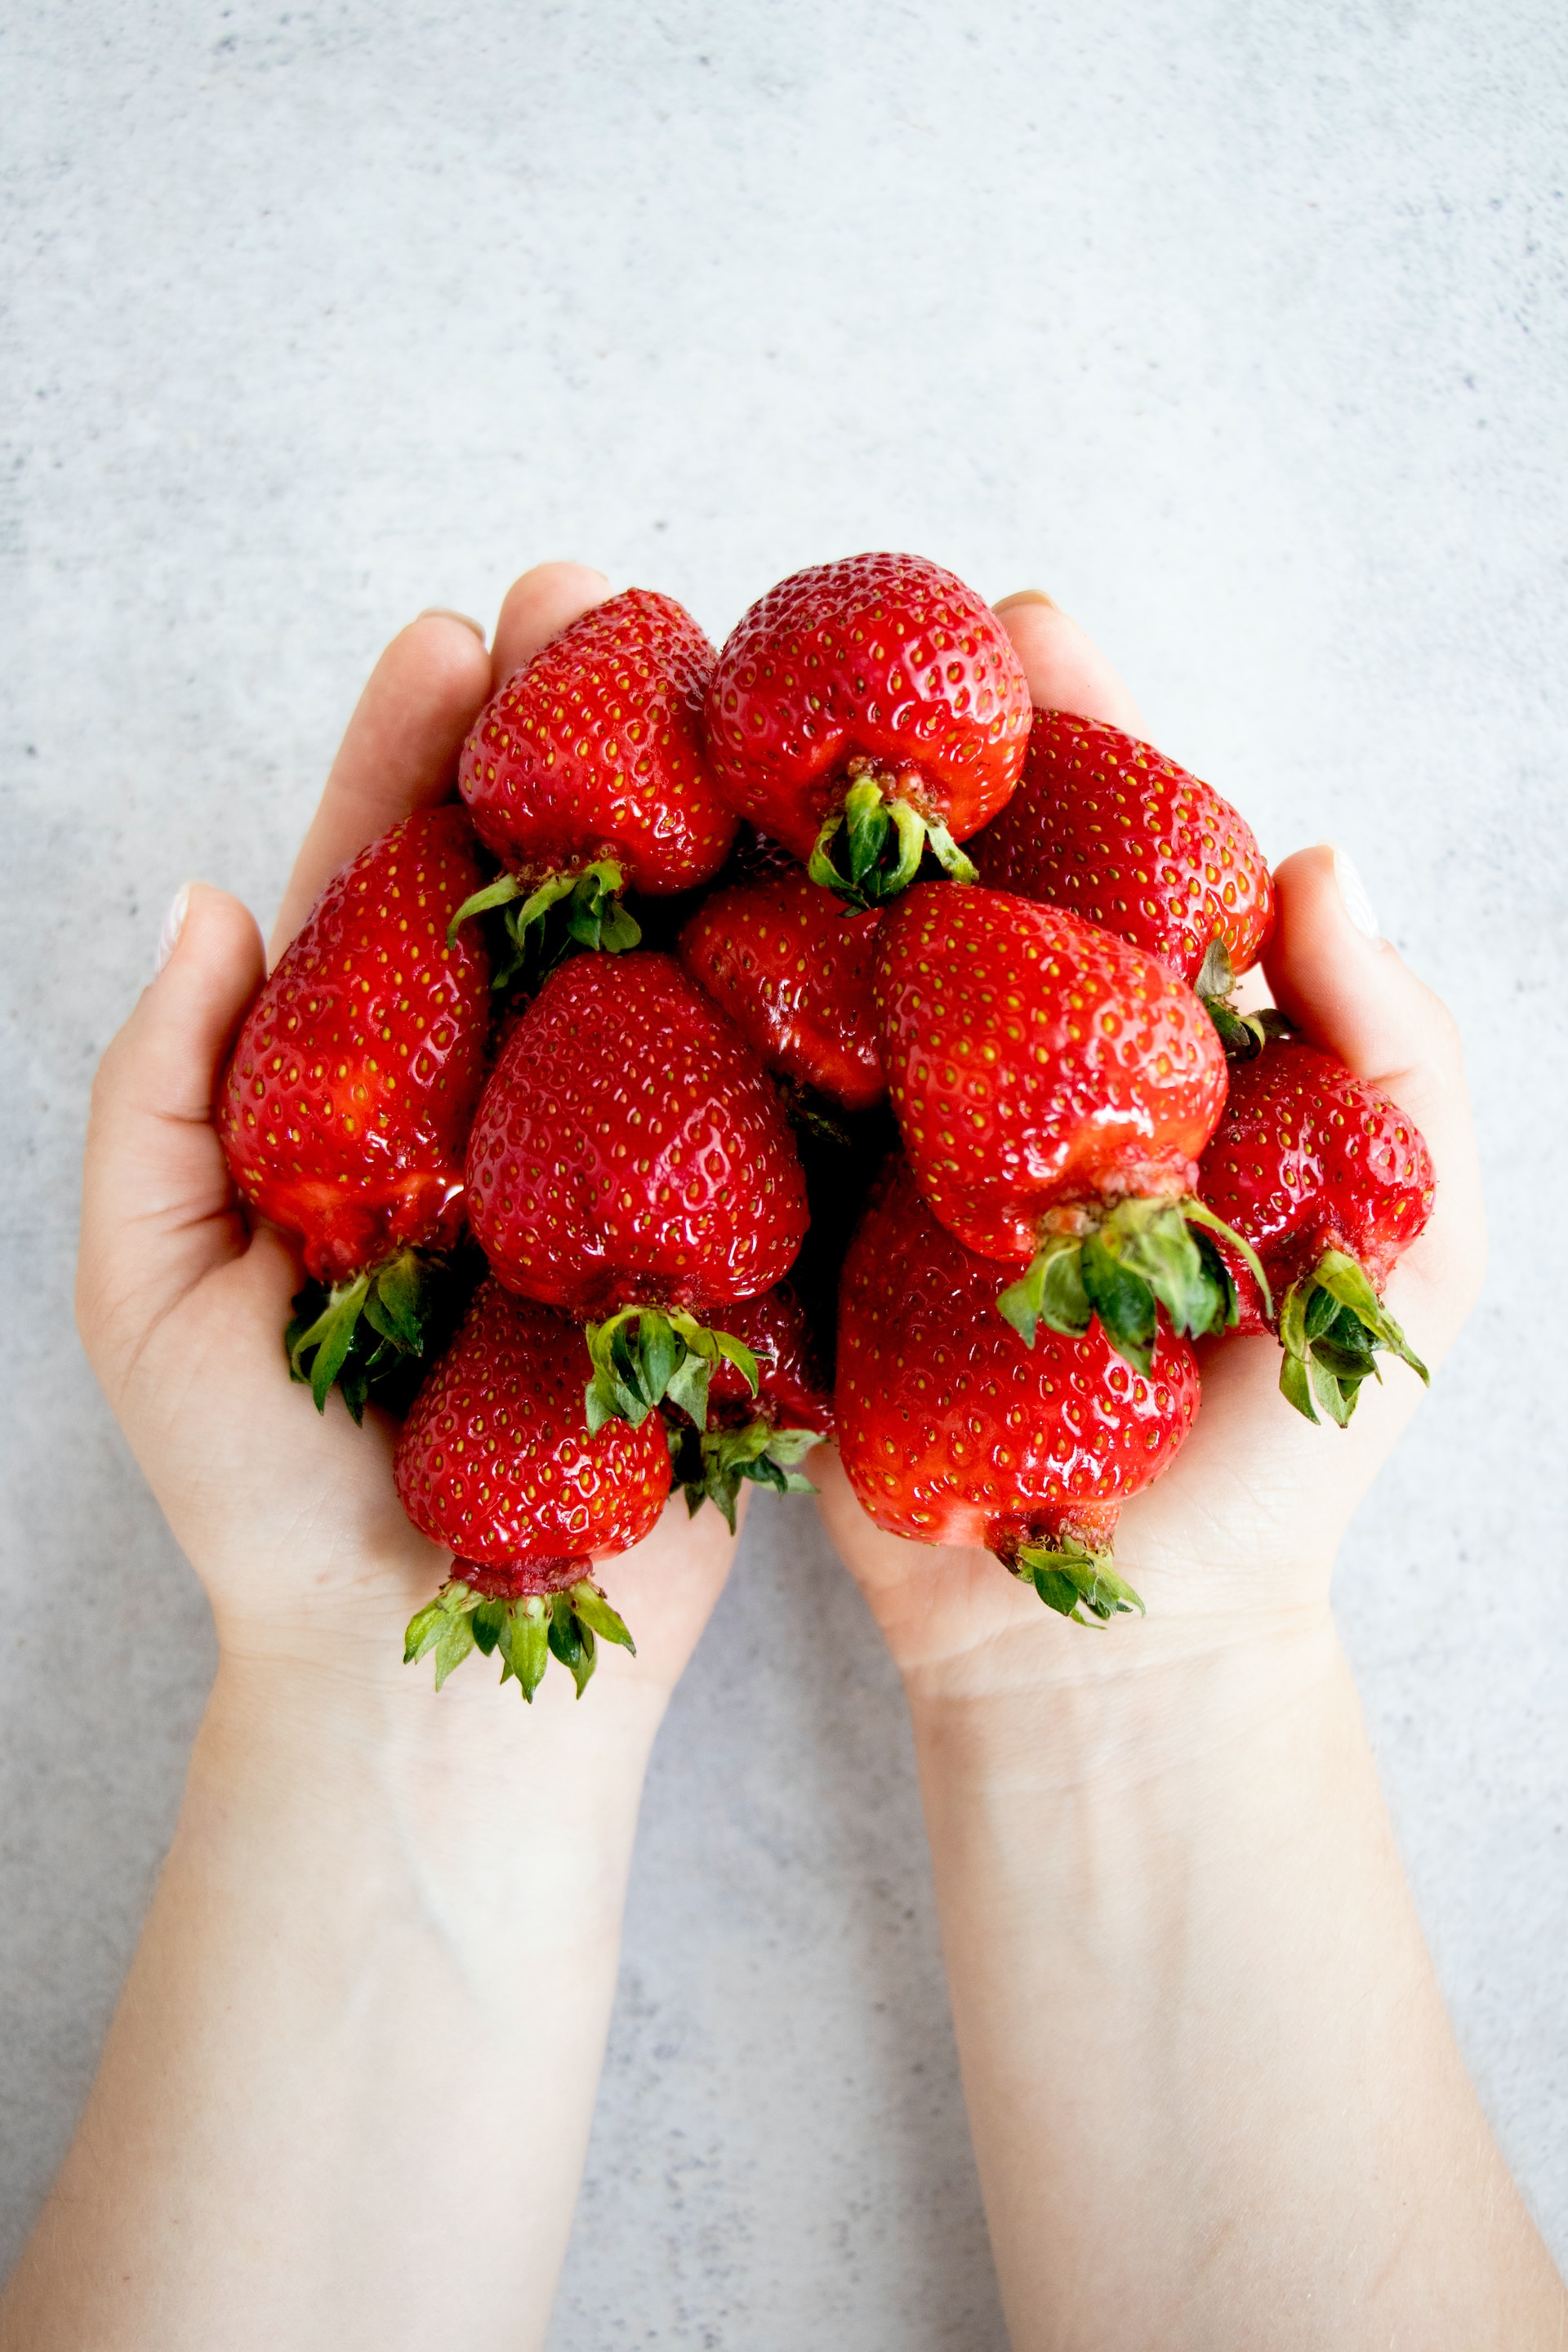 Are Strawberries Keto? Can You Eat Them on a Low Carb Diet?